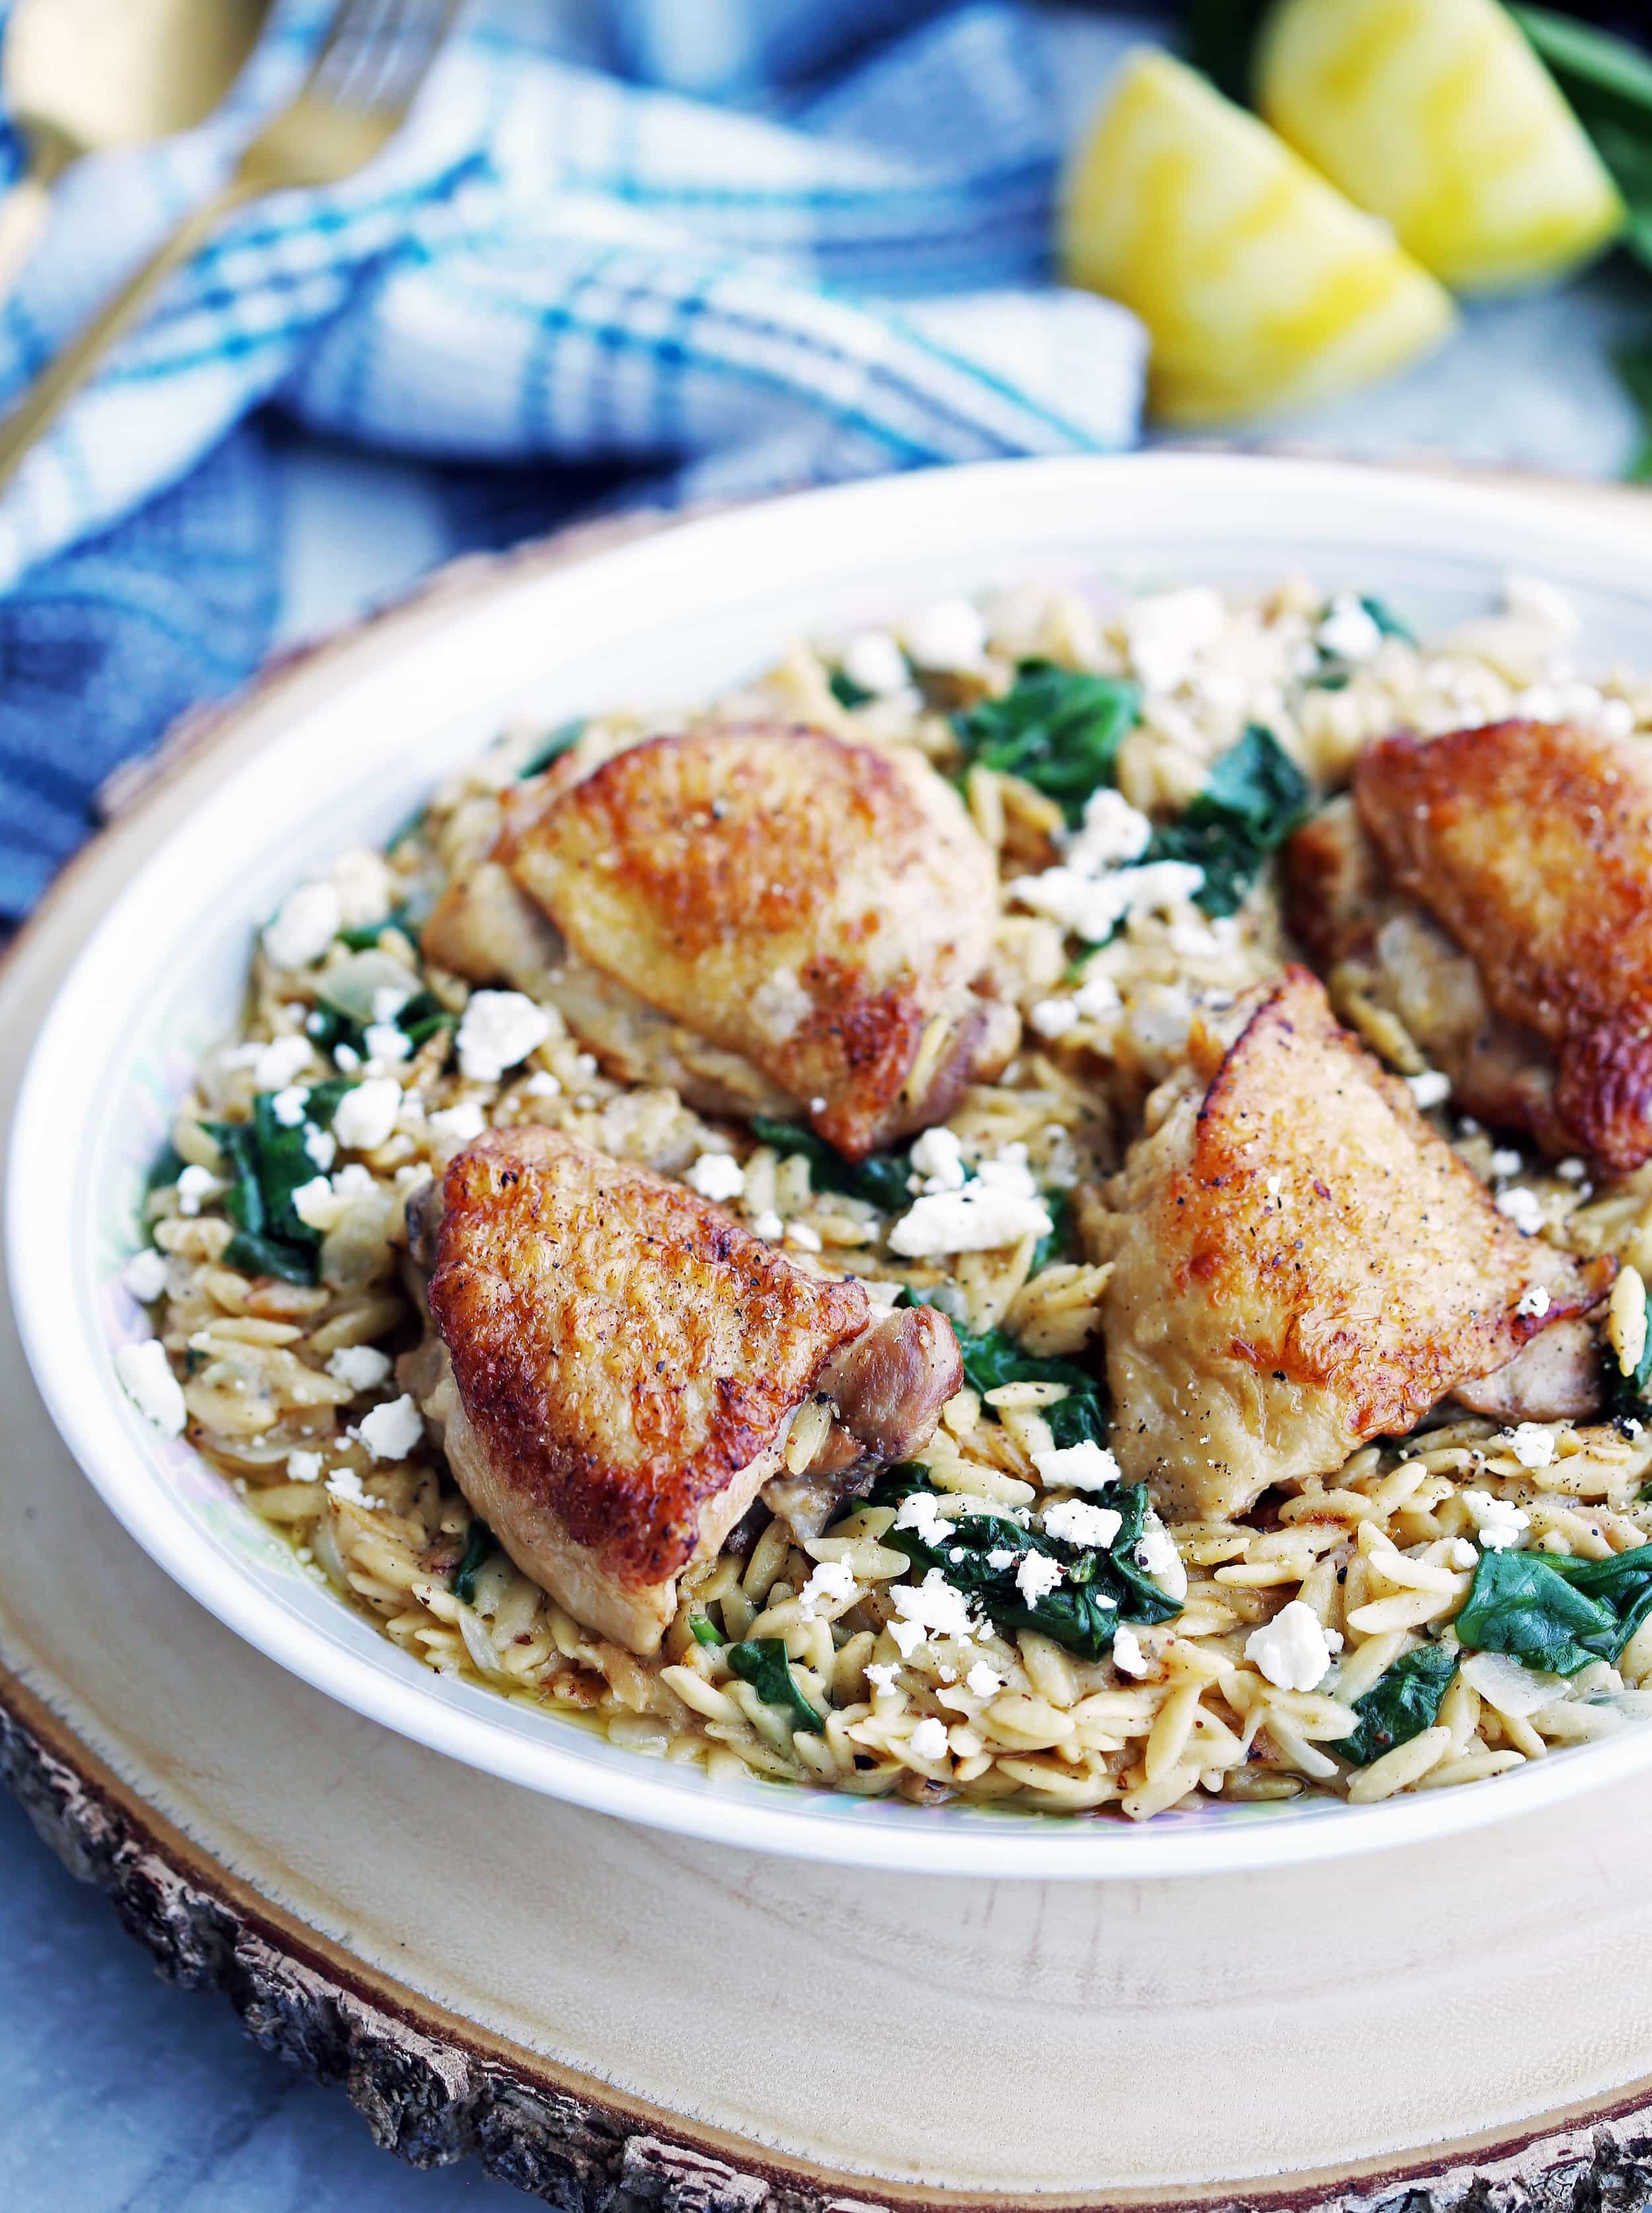 Crispy skin chicken thighs and lemon pepper orzo with feta and spinach on a large oval platter.